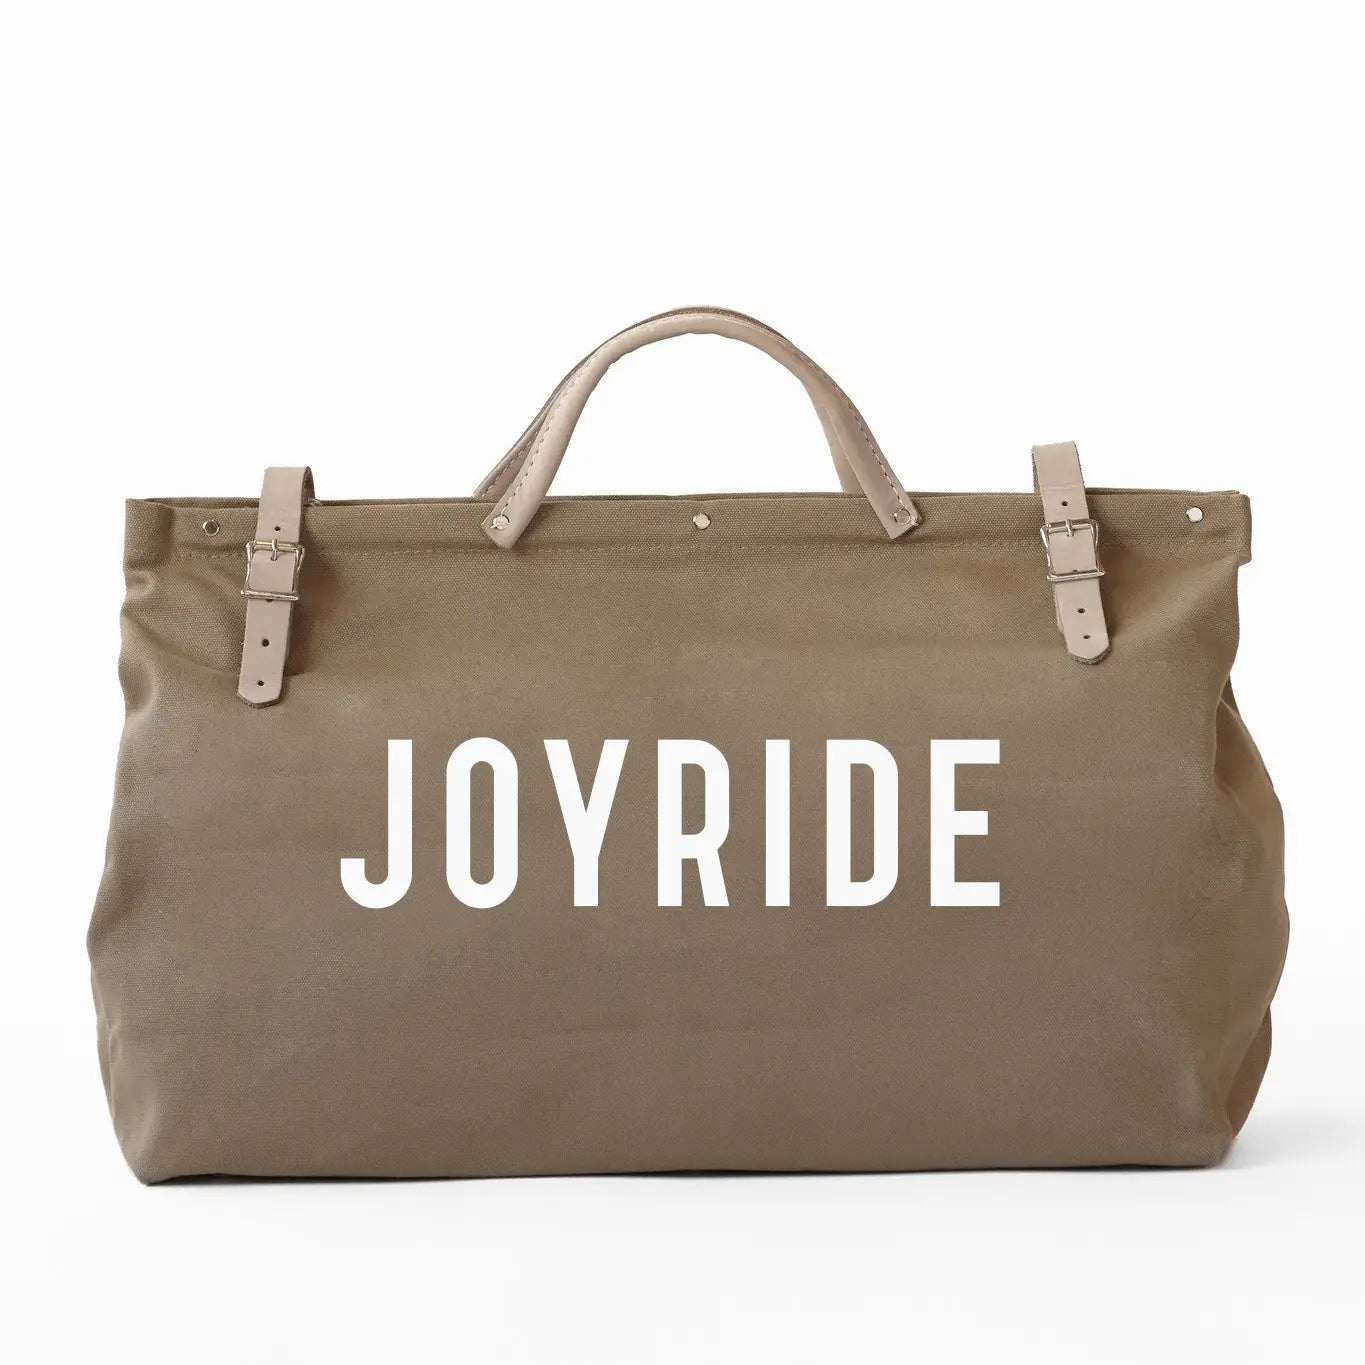 Joyride Canvas Utility Bag by Forestbound